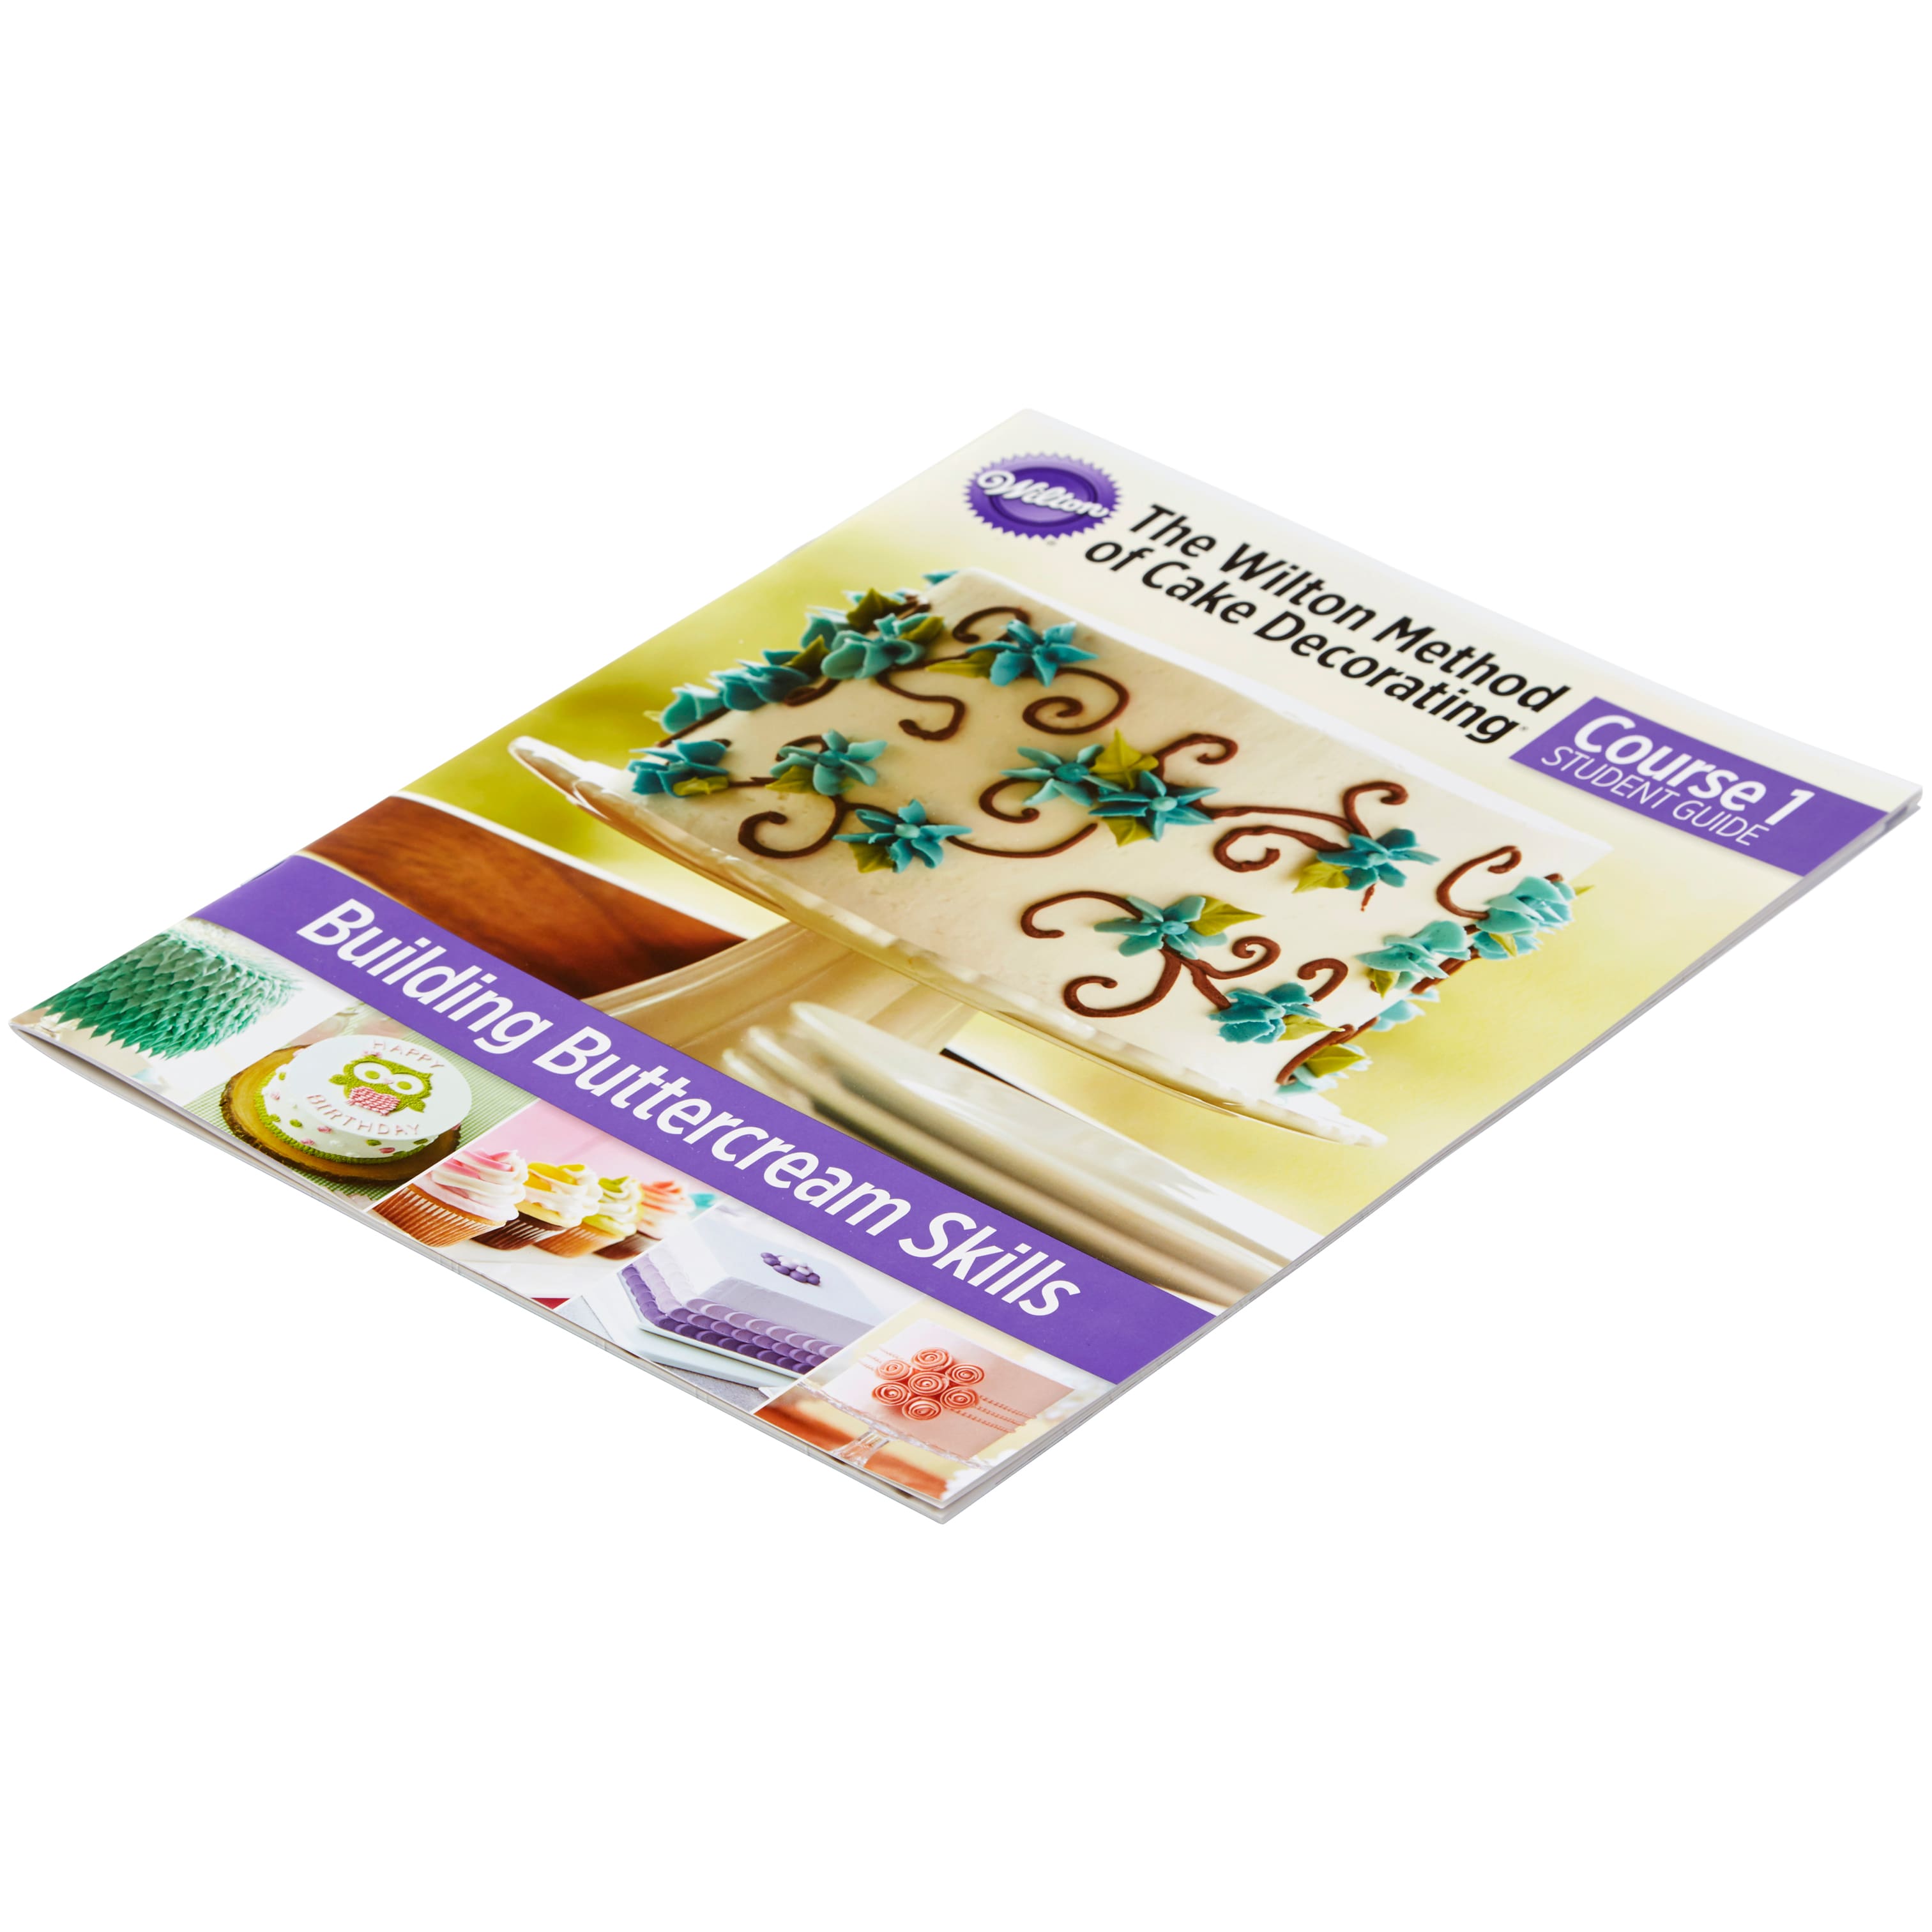 Find The Wilton Method Of Cake Decorating Course 1